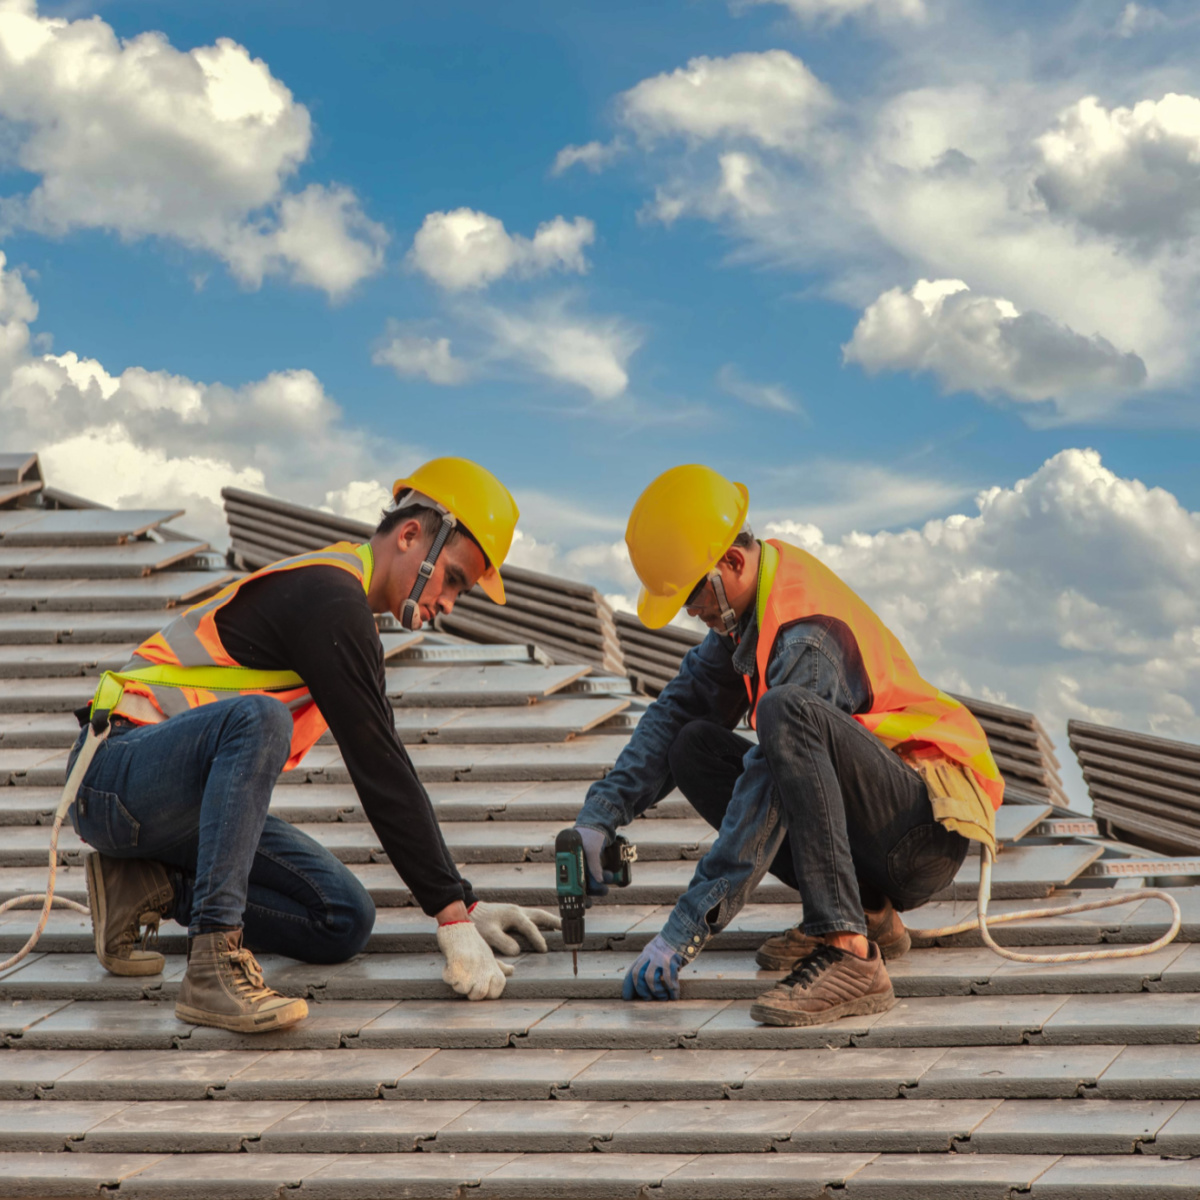 Houston roofing experts performing roof repairs as a reliable Kingwood roofer would.